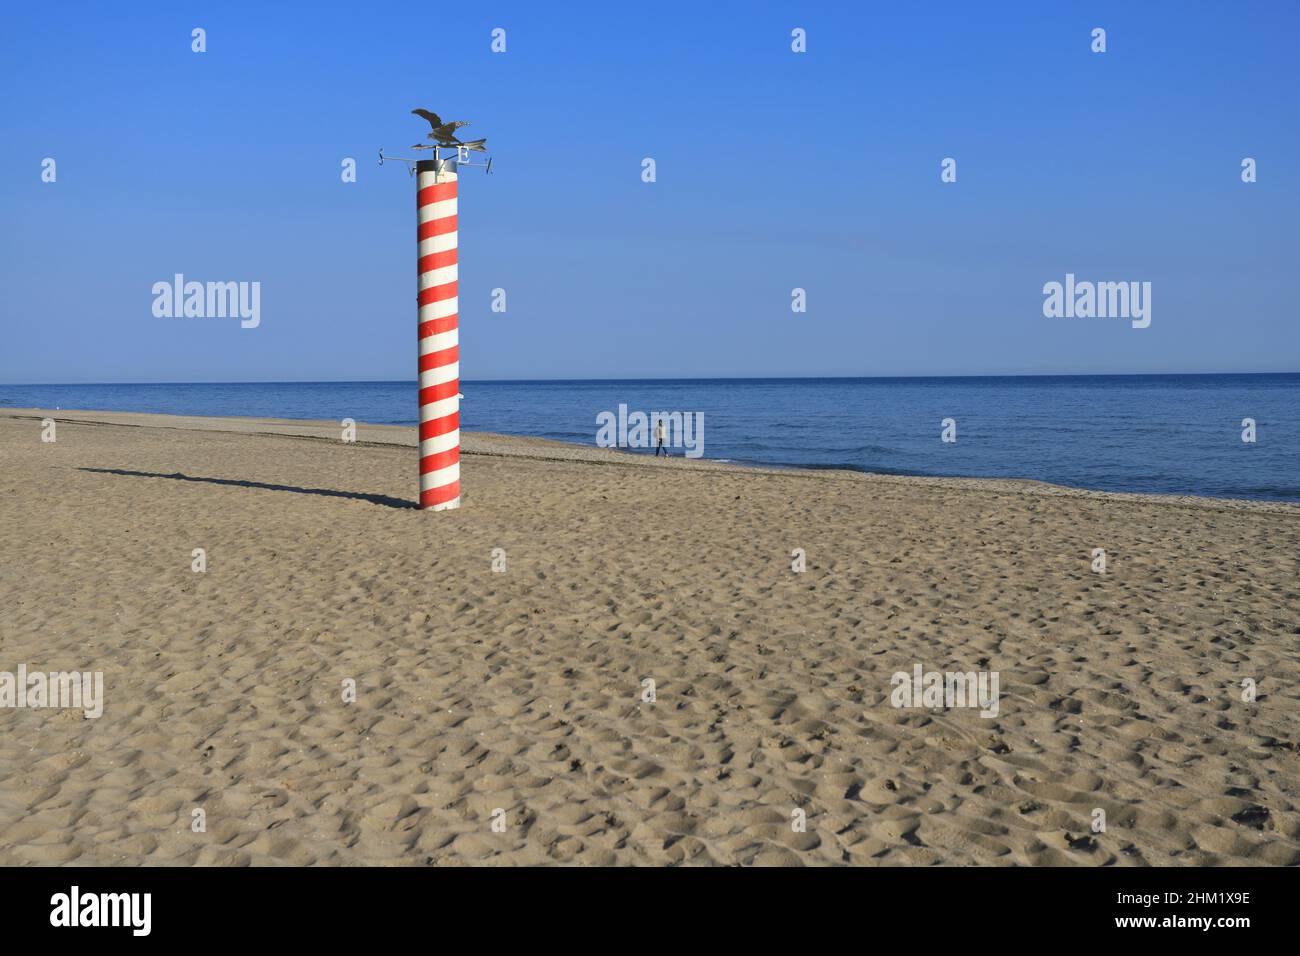 Red and white pole as symbol of the most northern point of Poland. Pole at Jastrzebia Gora beach. Stock Photo